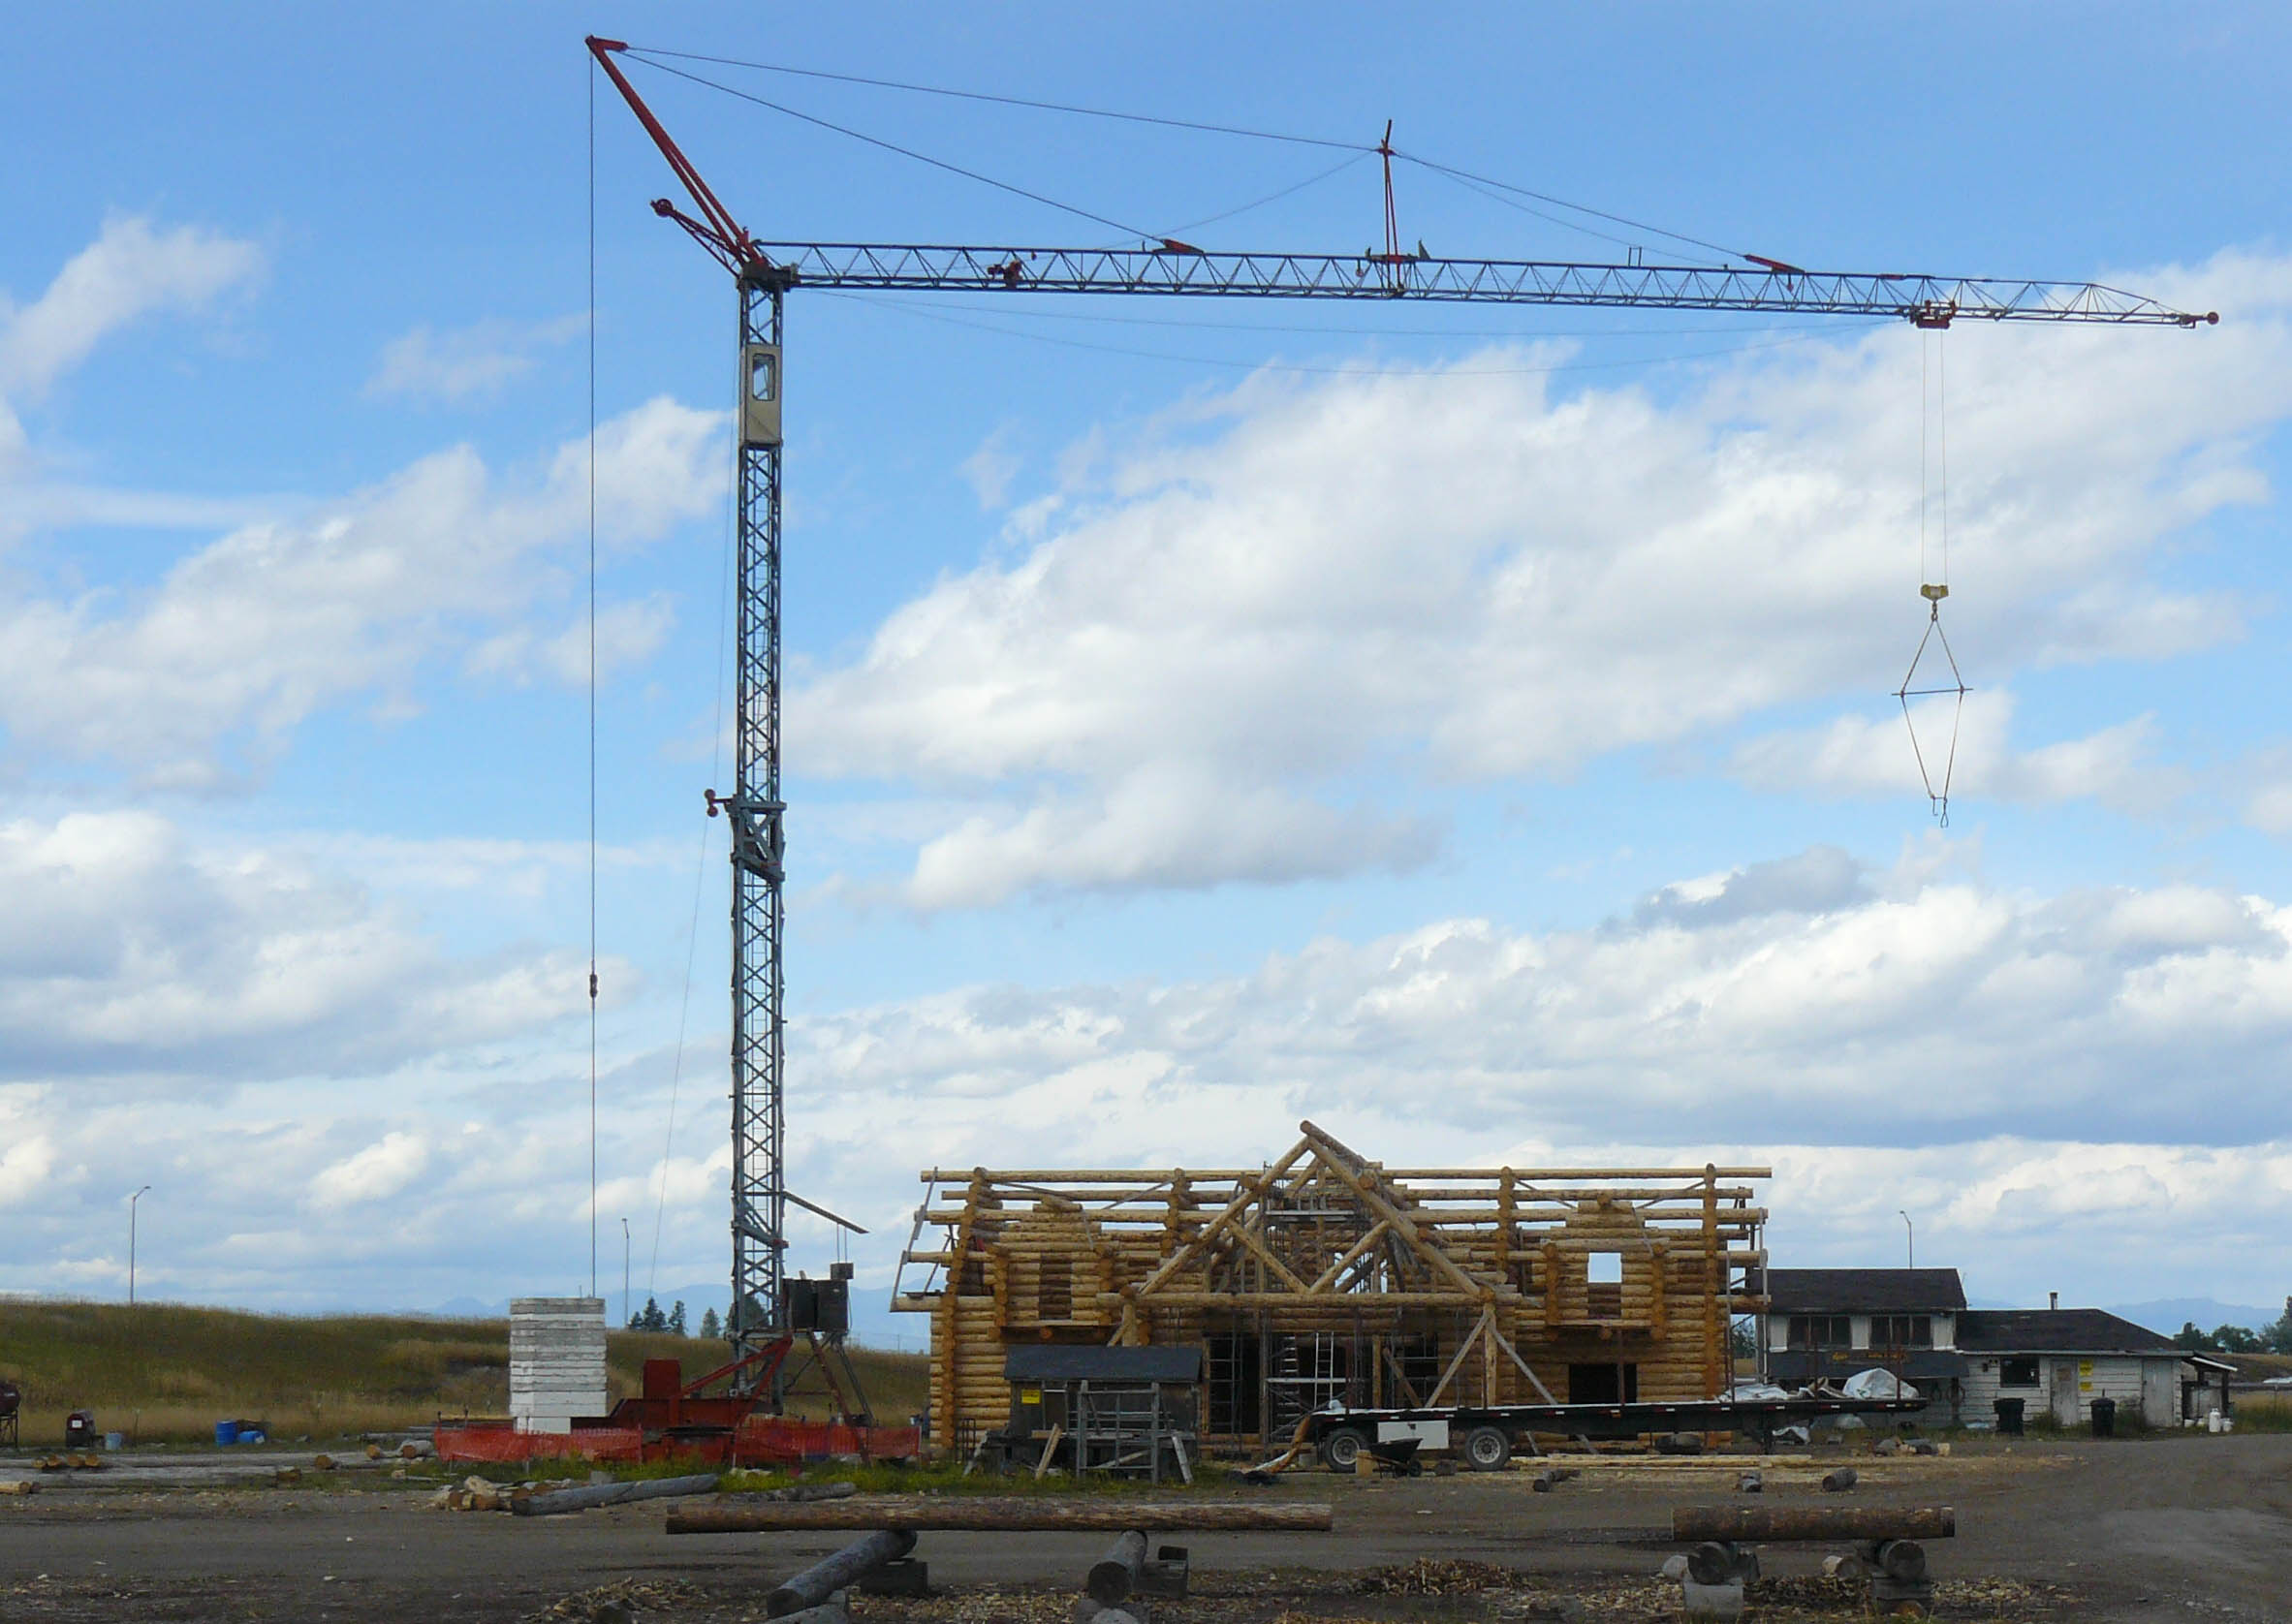 2012 Coolest Tower Crane Photos | All Things Cranes